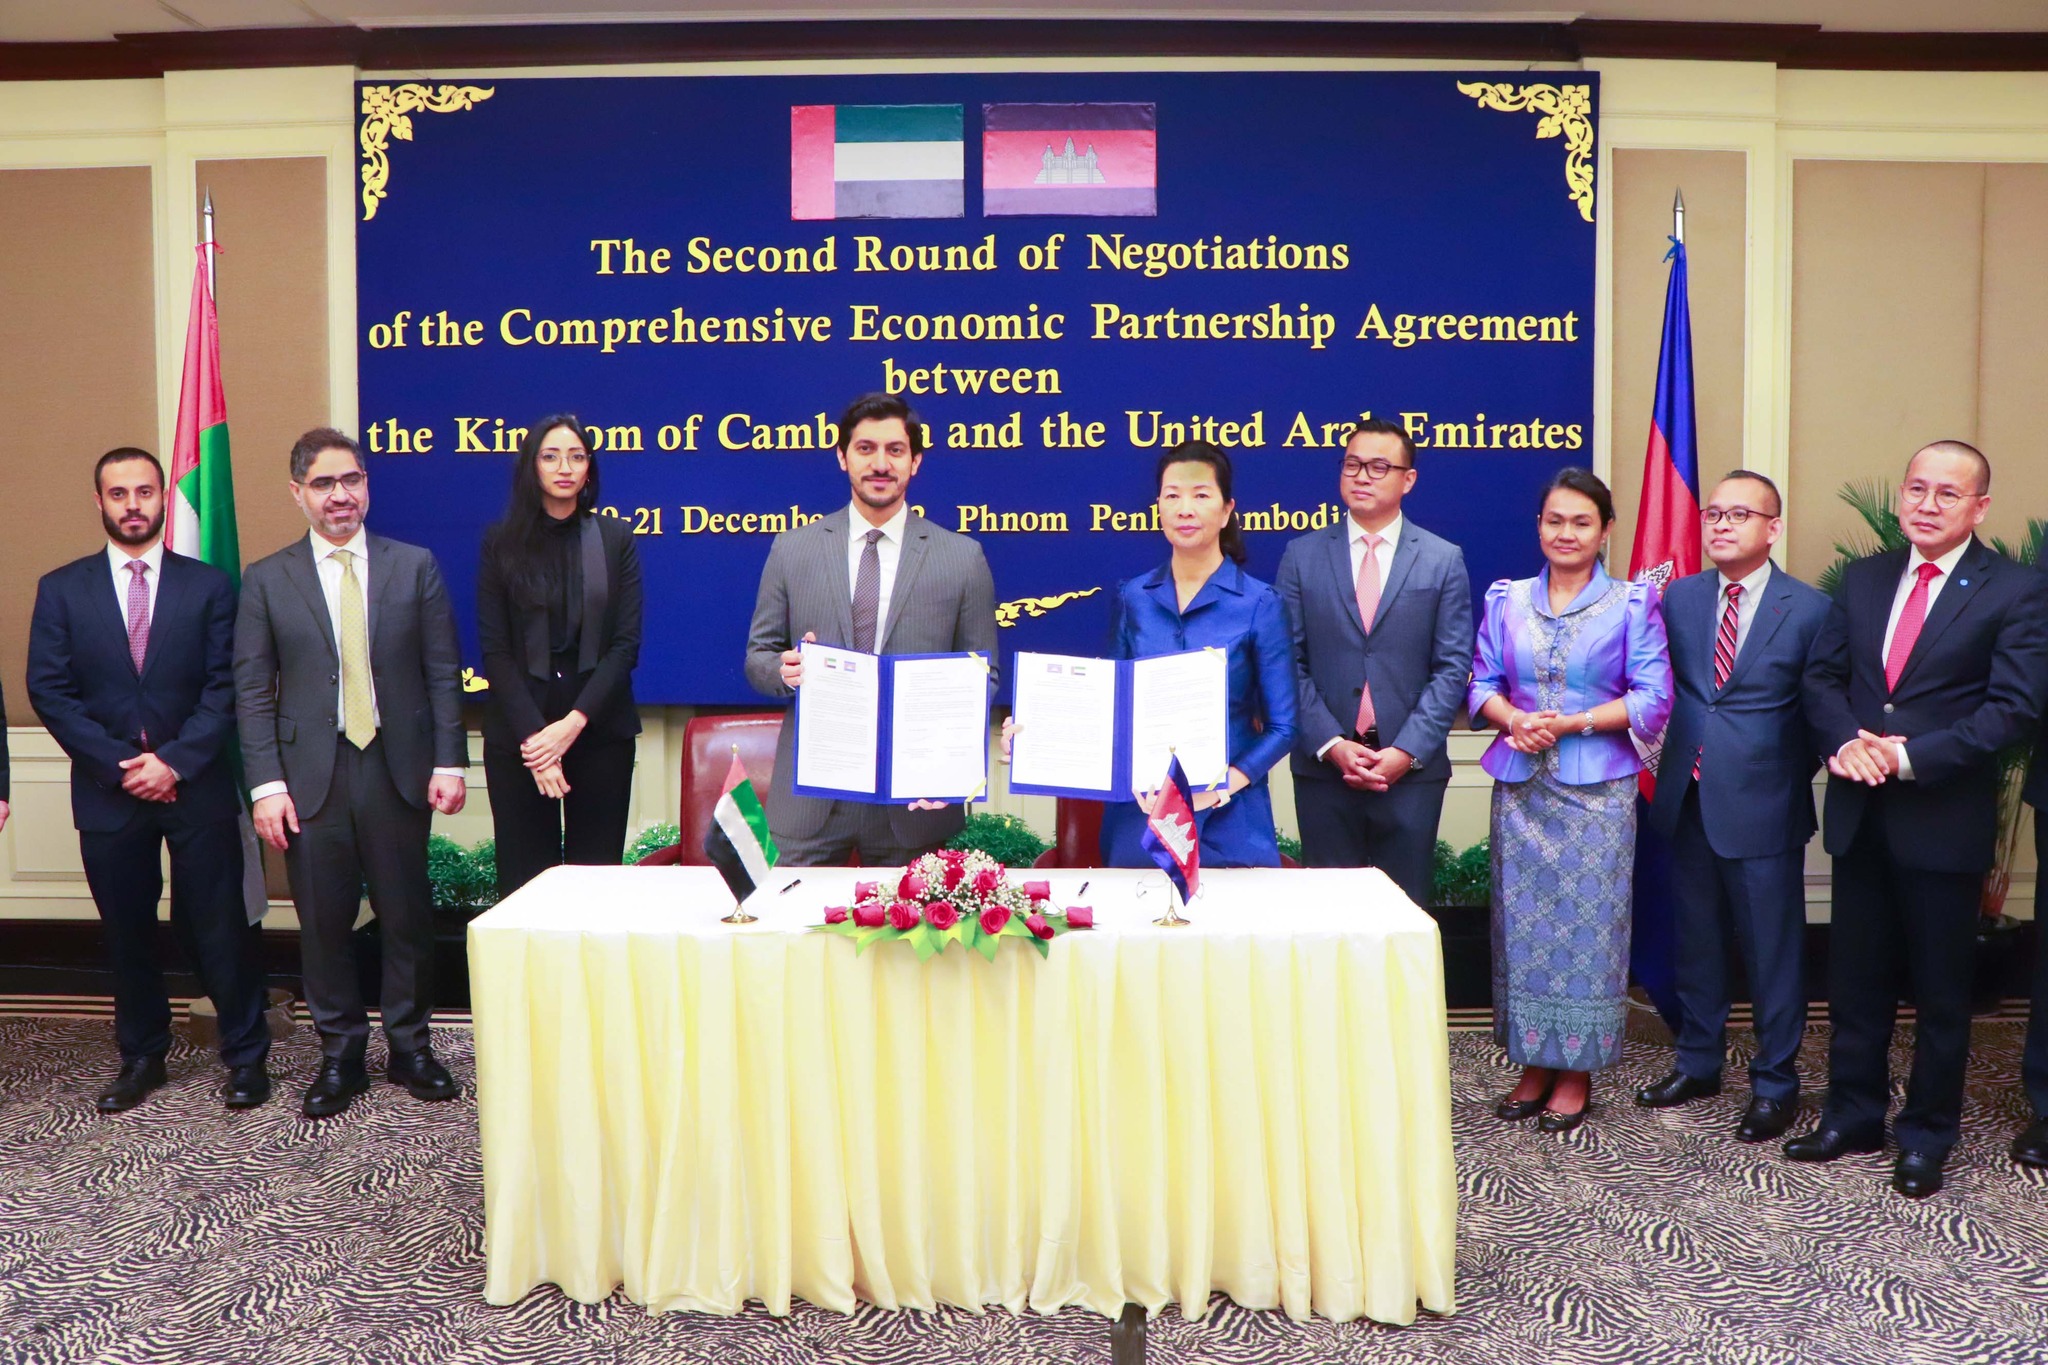 Cambodia and the UAE have concluded the 2nd round of negotiations on the Comprehensive Economic Partnership Agreement